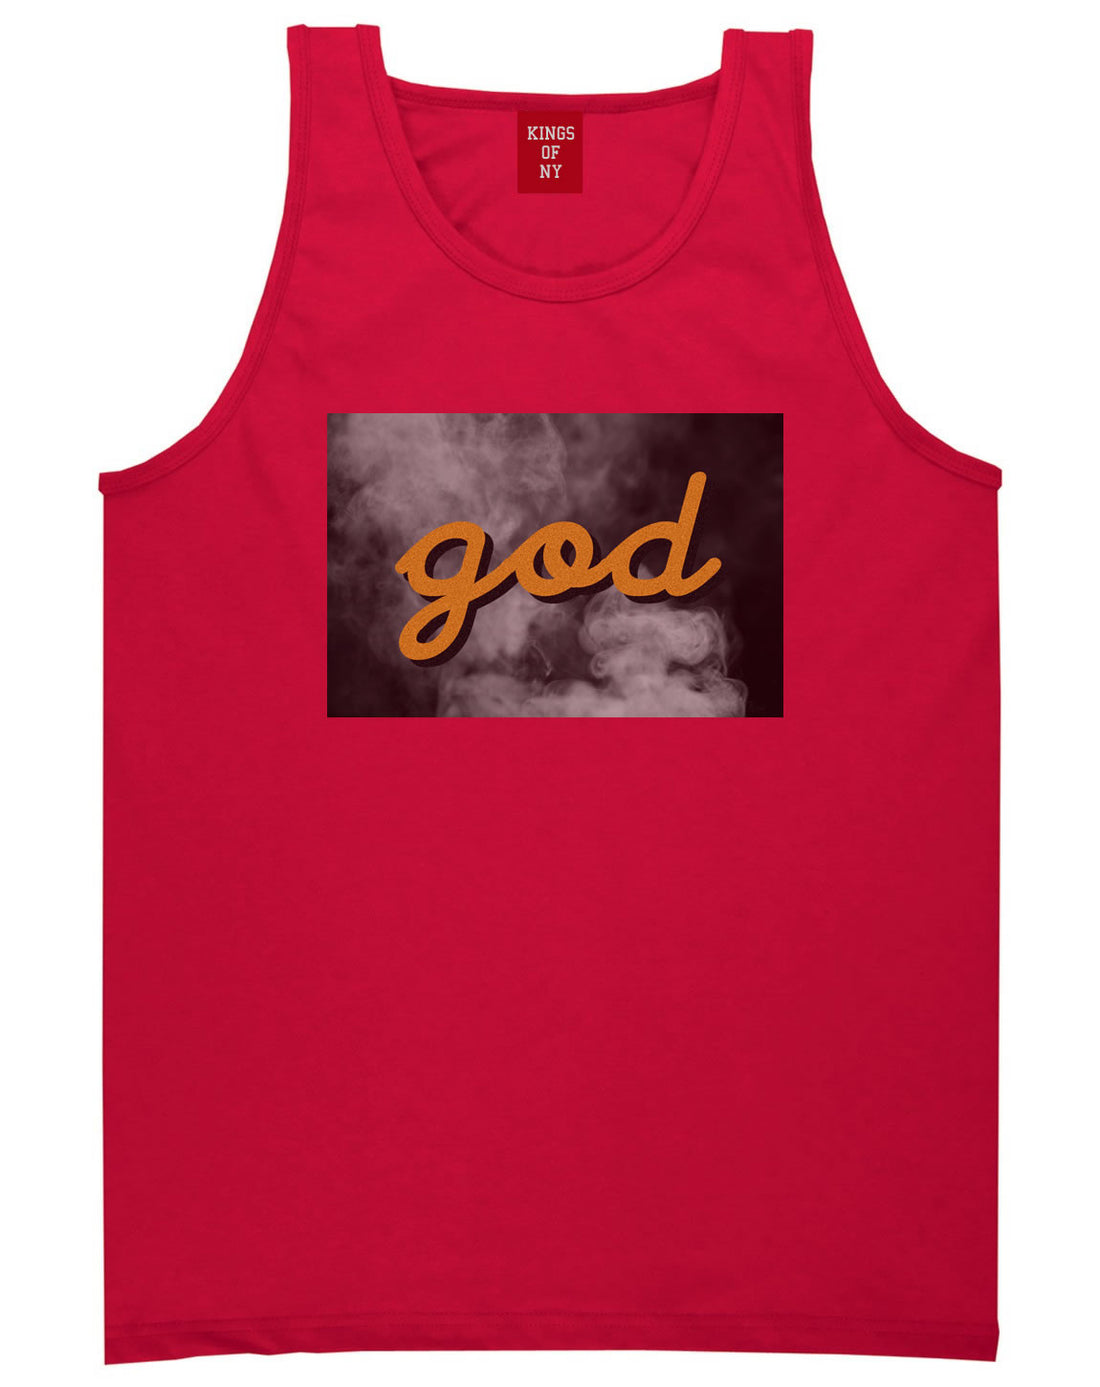 God Up In Smoke Puff Goth Dark Tank Top in Red By Kings Of NY